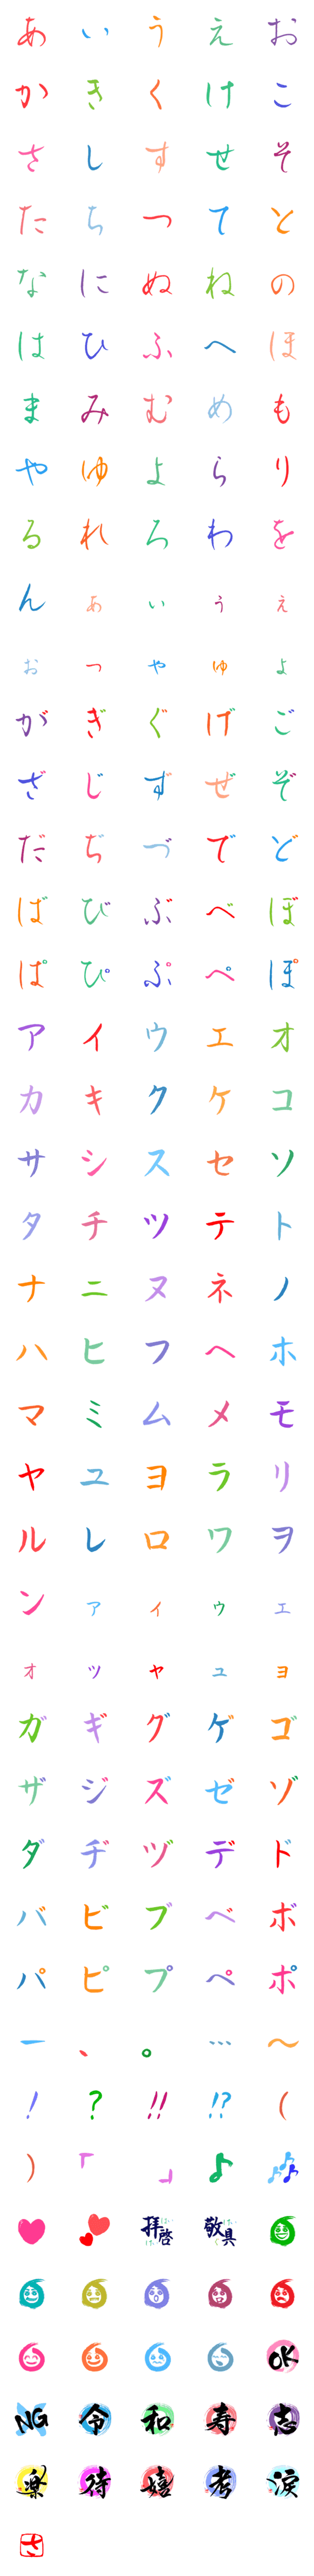 [LINE絵文字]The手書き～かな筆文字＆絵文字♪2の画像一覧